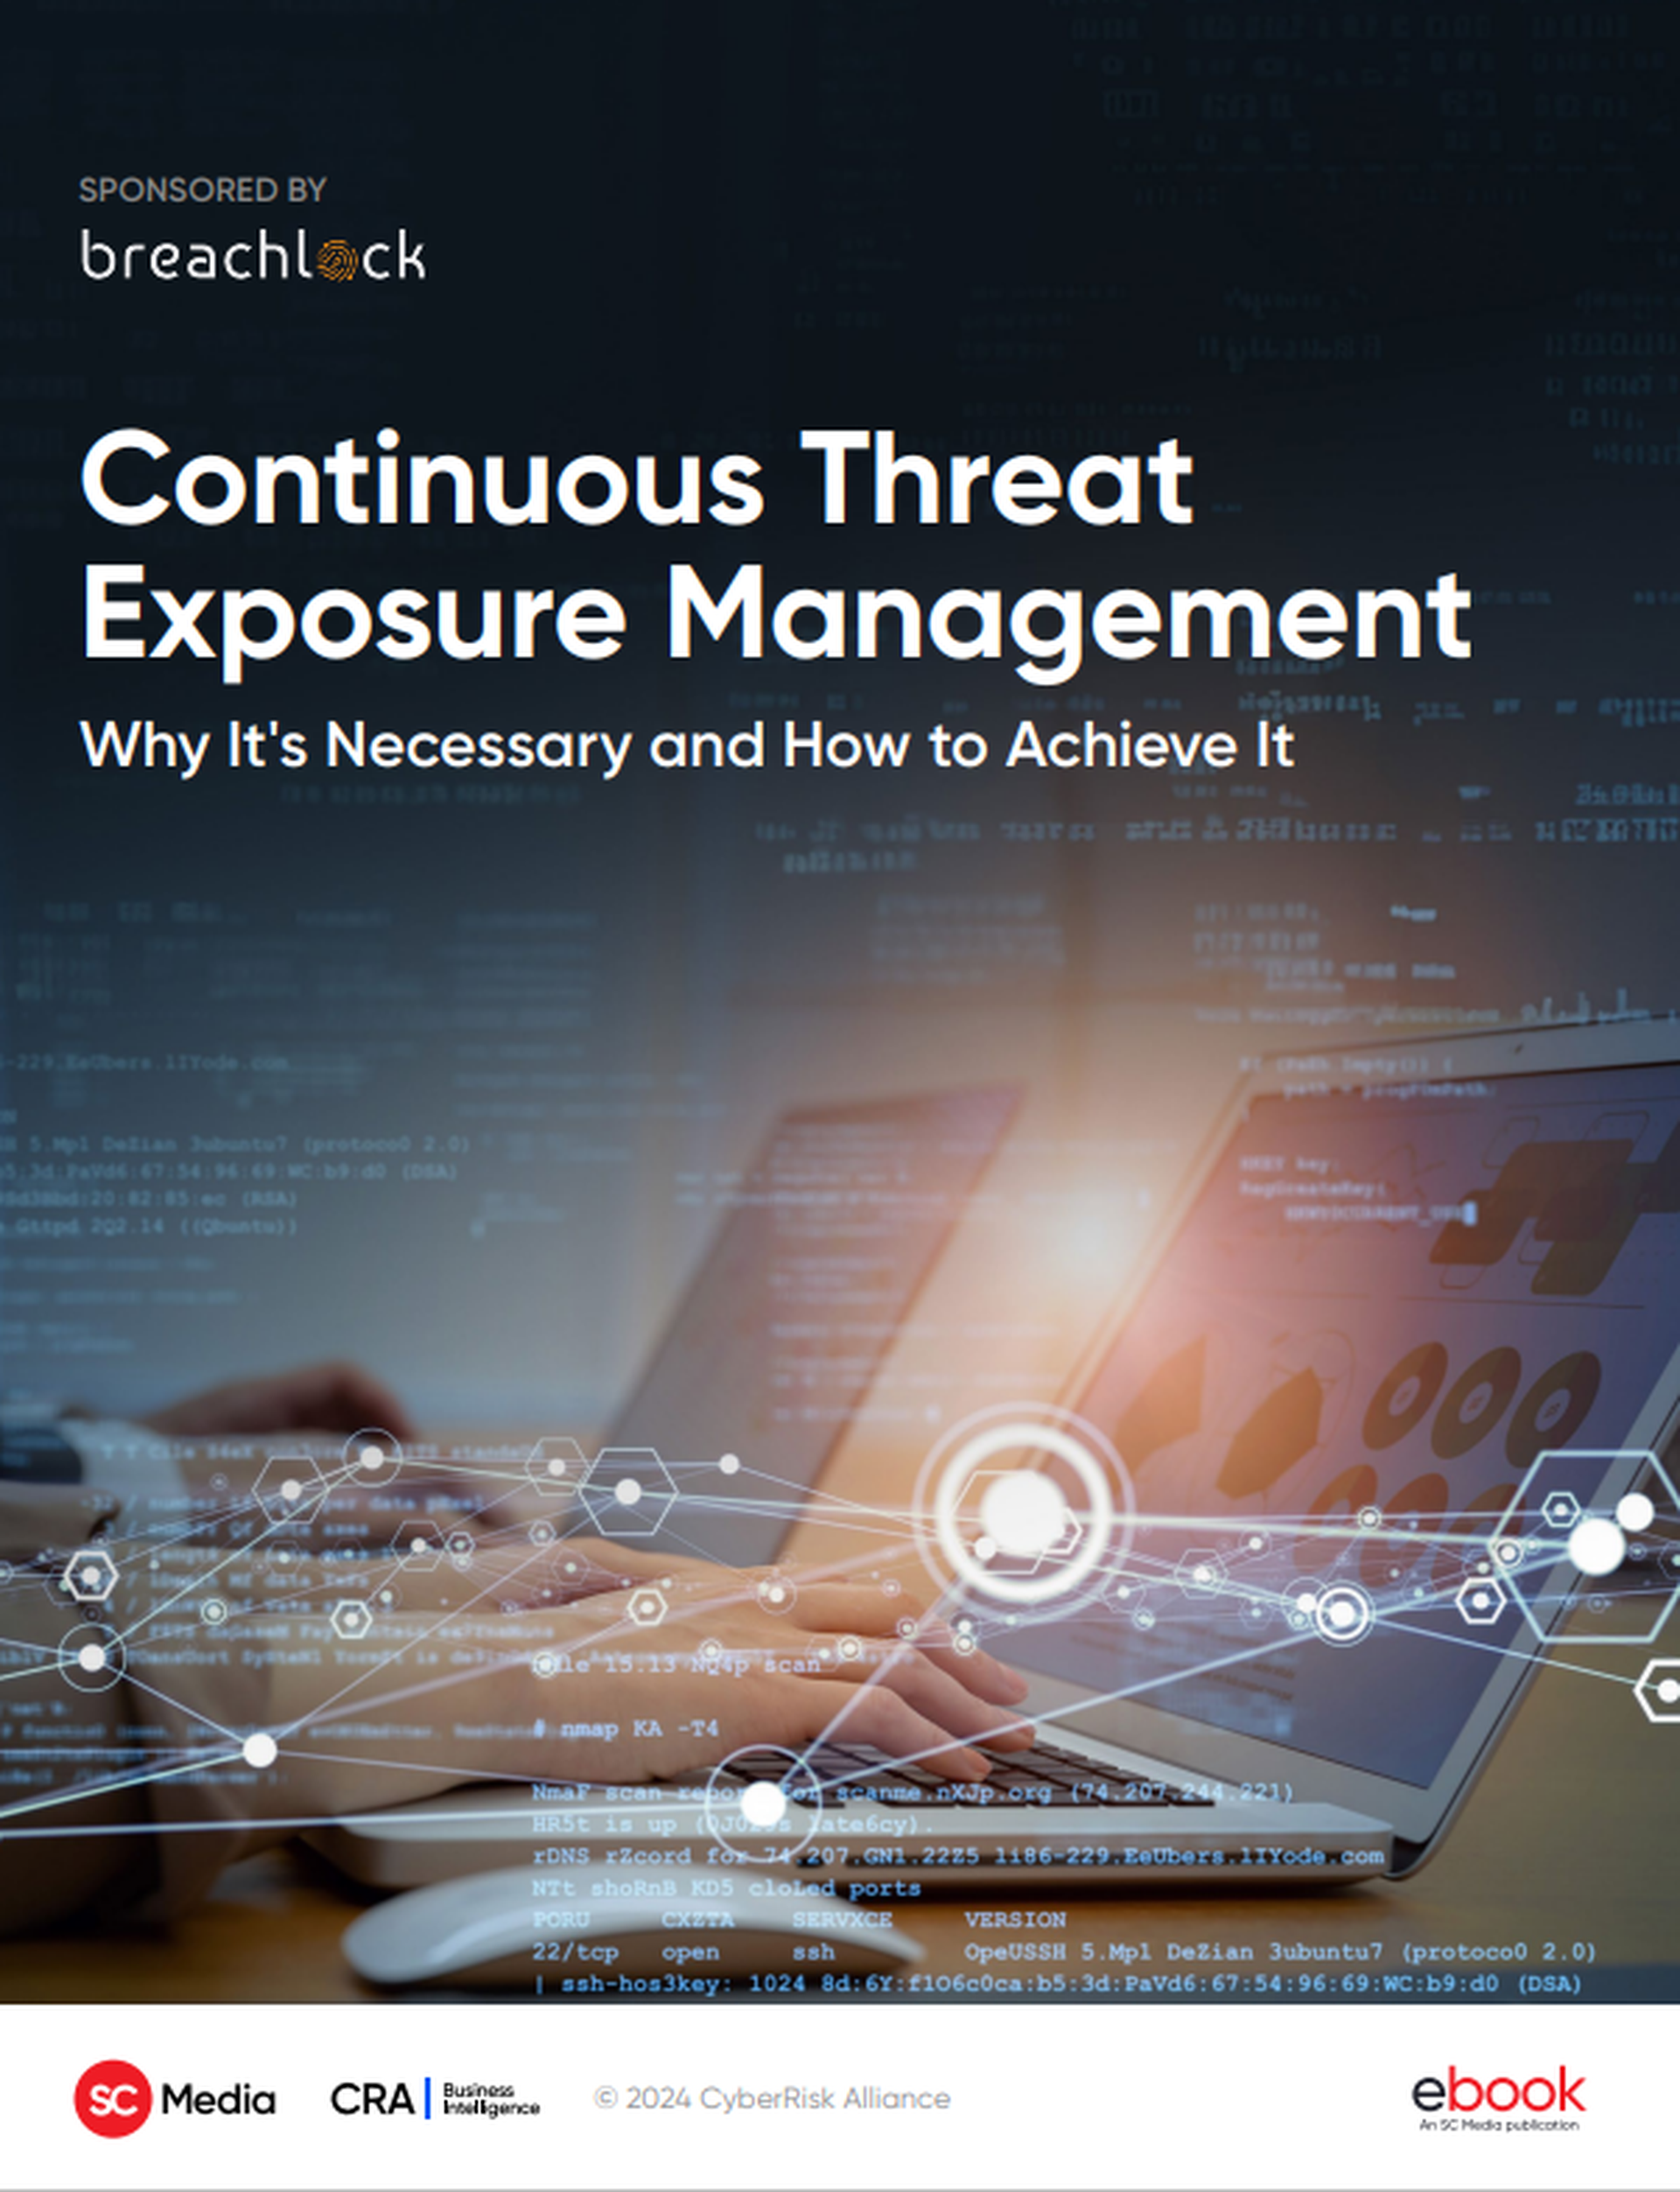 Continuous Threat Exposure Management: Why It’s Necessary and How to Achieve It